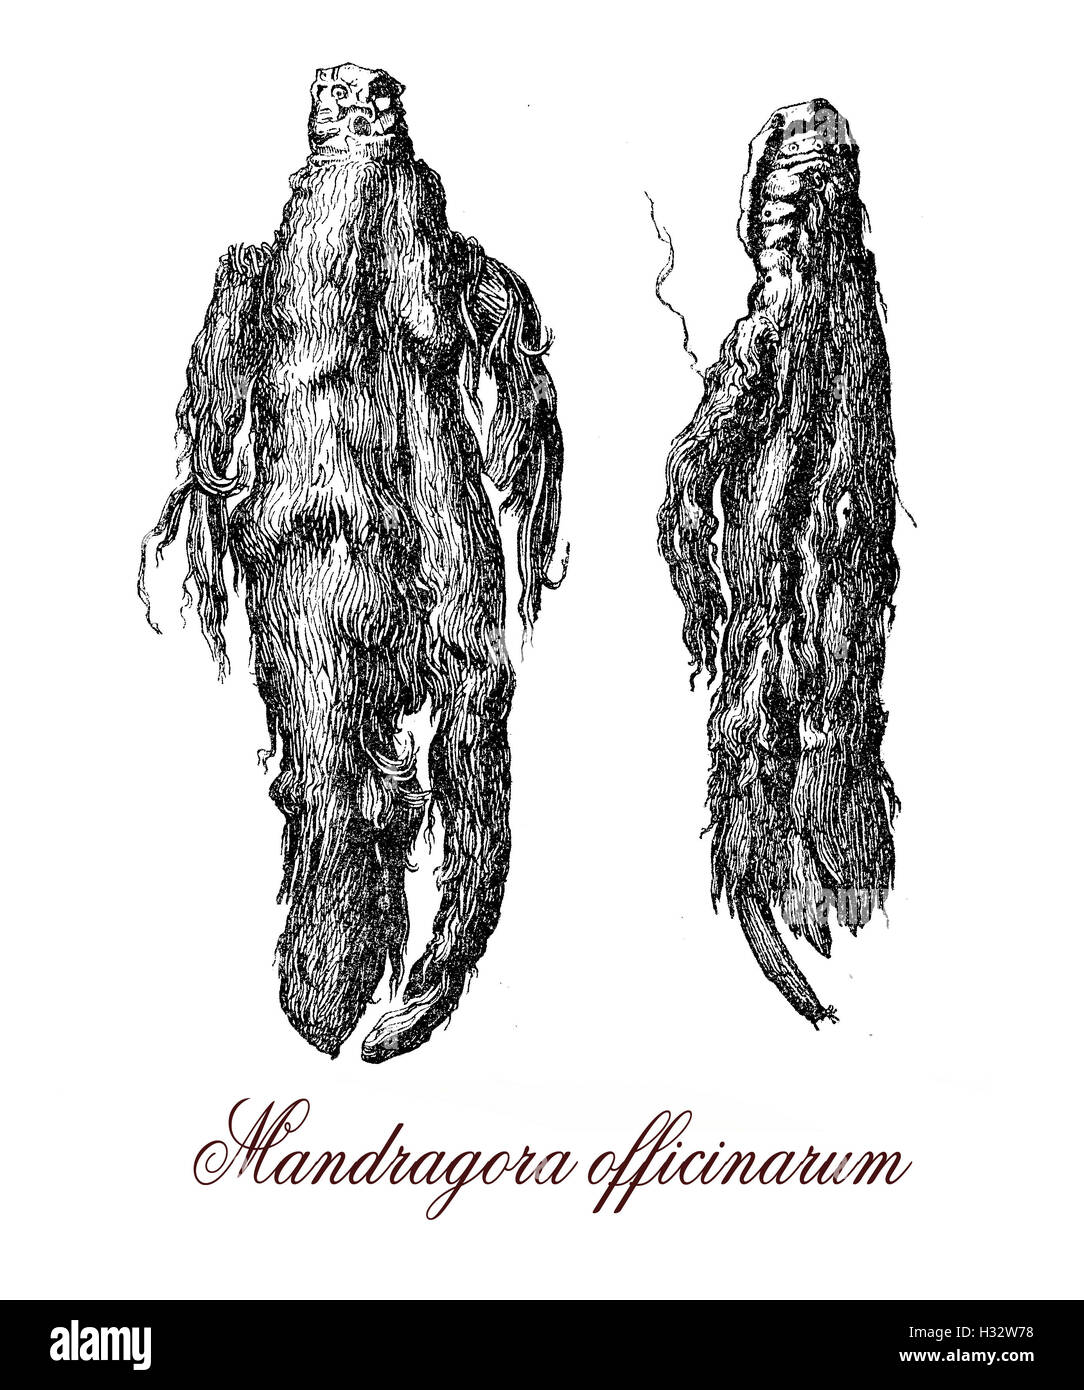 Mandragora is a poisonous plant native from Mediterranean area and contains deliriant hallucinogenic tropane alkaloids.The shape of the roots often resembles human figures. Vintage engraving XVI century Stock Photo